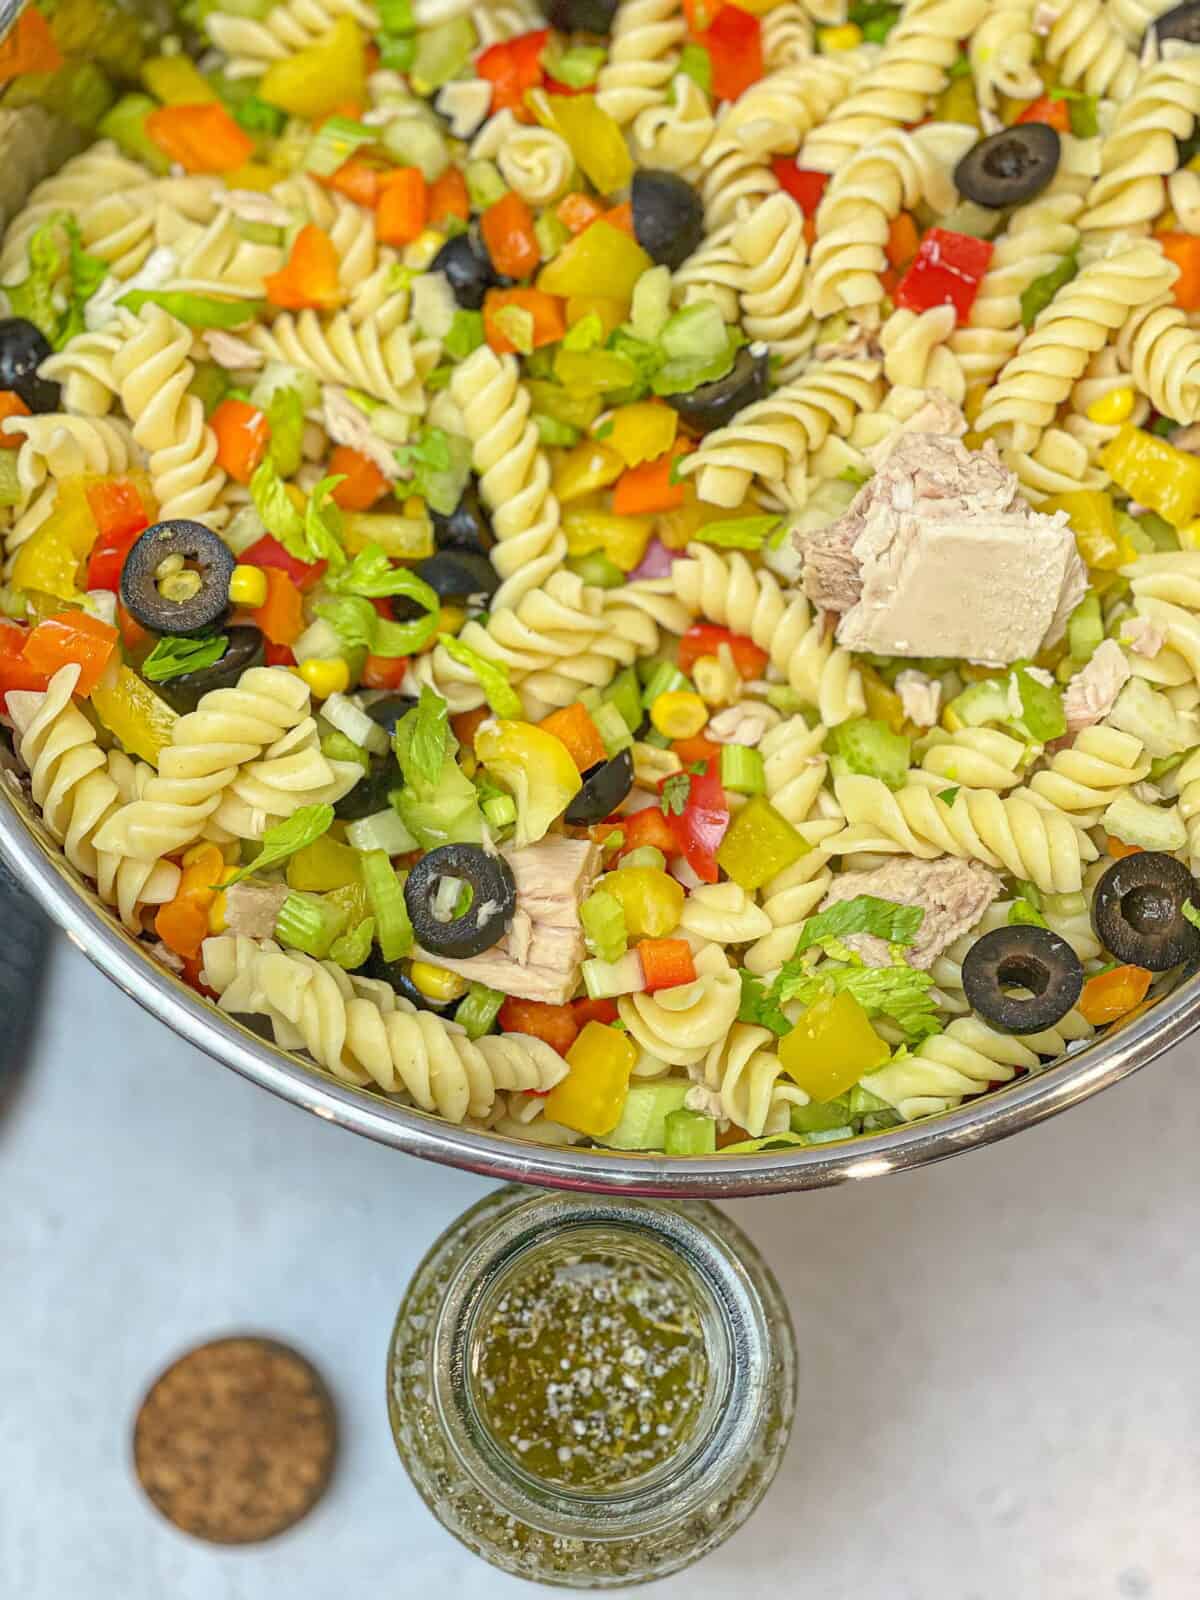 Large bowl of healthy pasta salad with tuna and an Italian creamy vinaigrette dressing in a bottle